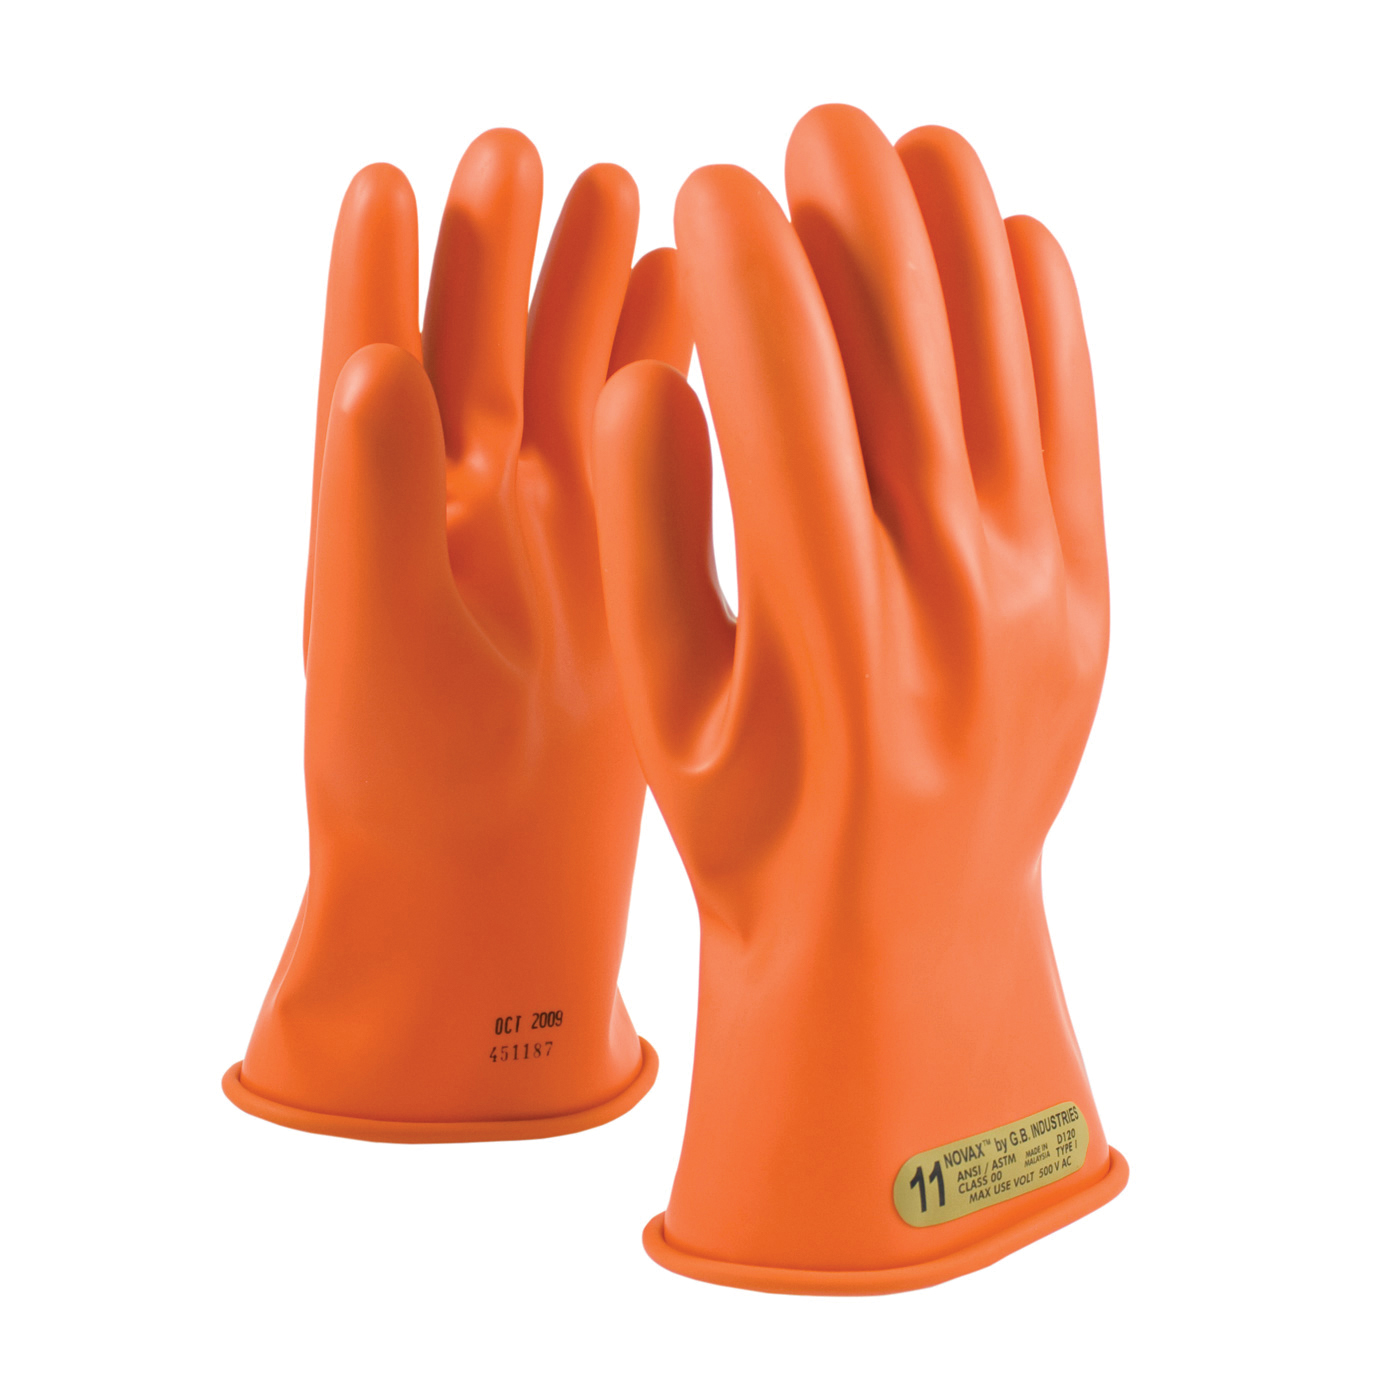 Novax® 147-00-11/9 Insulating Unisex Electrical Safety Gloves, SZ 9, Natural Rubber, Orange, 11 in L, ASTM Class: Class 00, 500 VAC/750 VDC Max Use Voltage